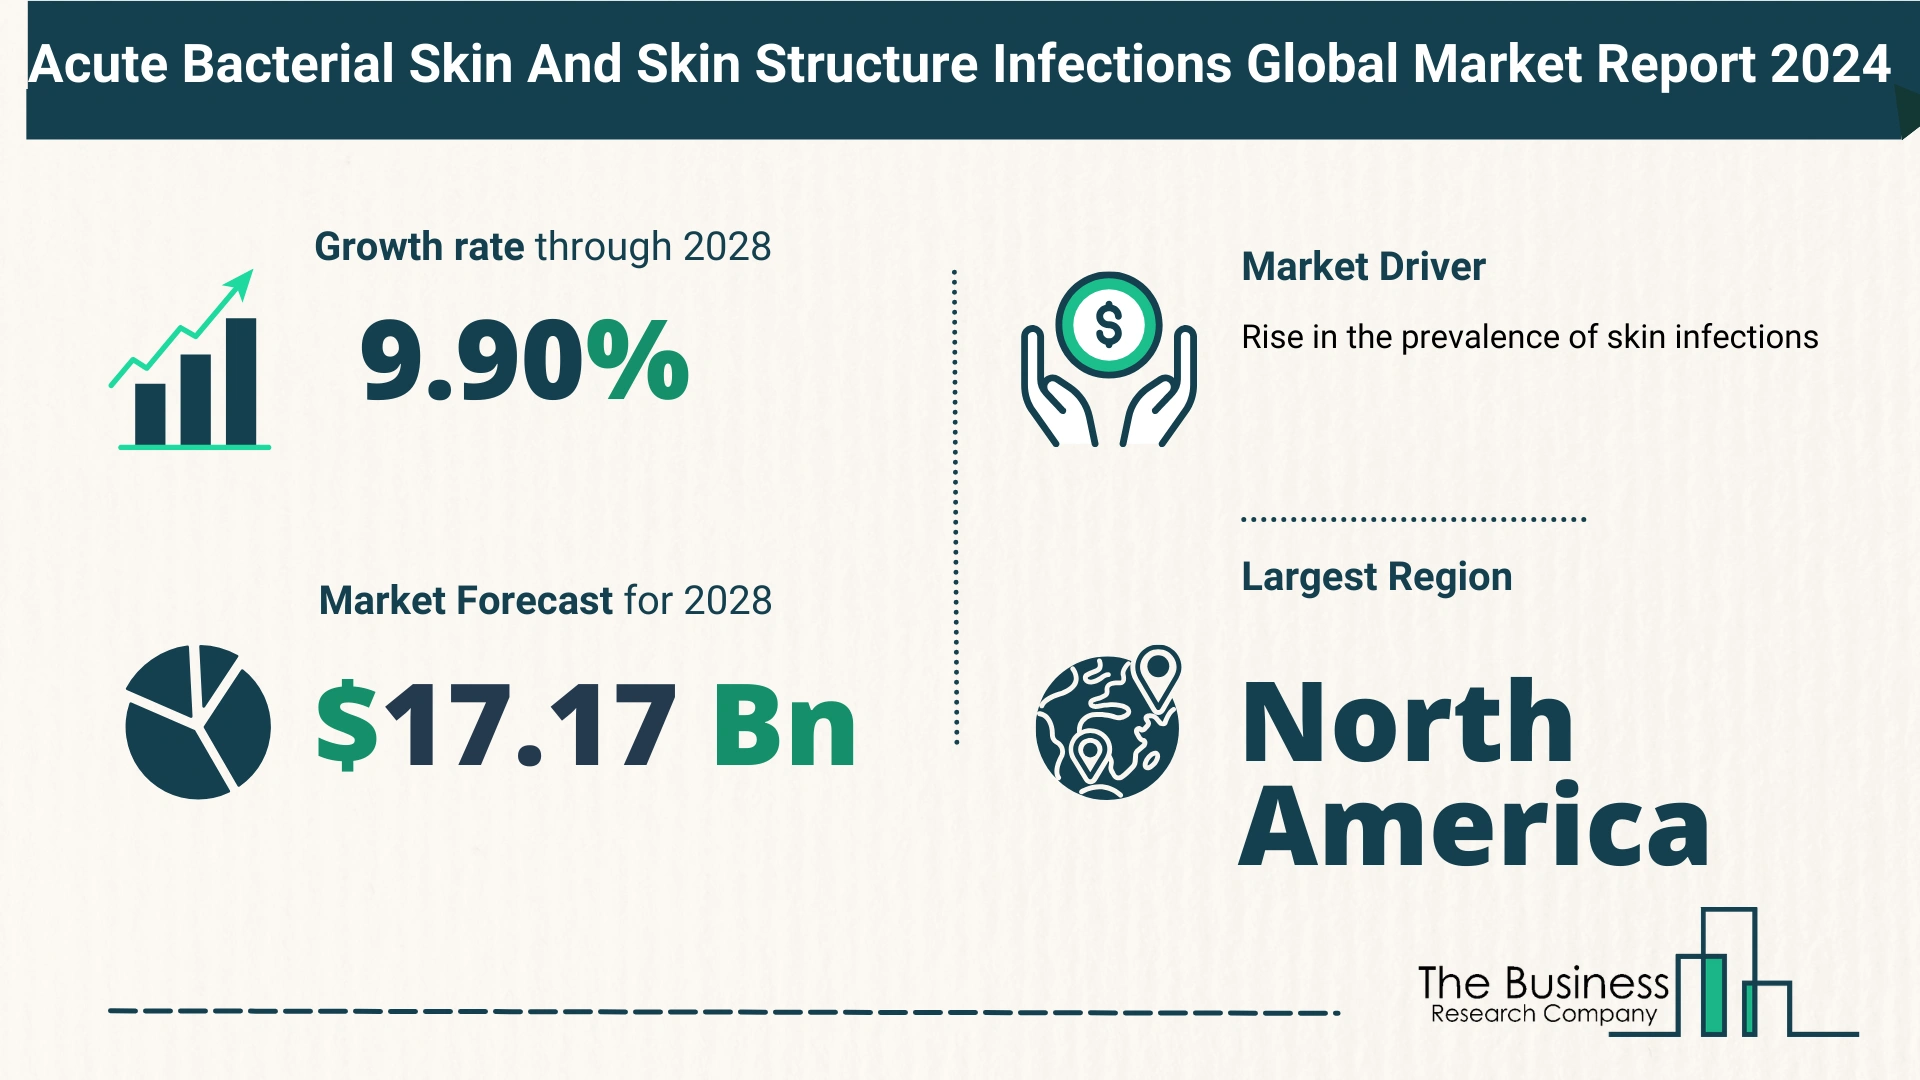 Global Acute Bacterial Skin And Skin Structure Infection Market Size